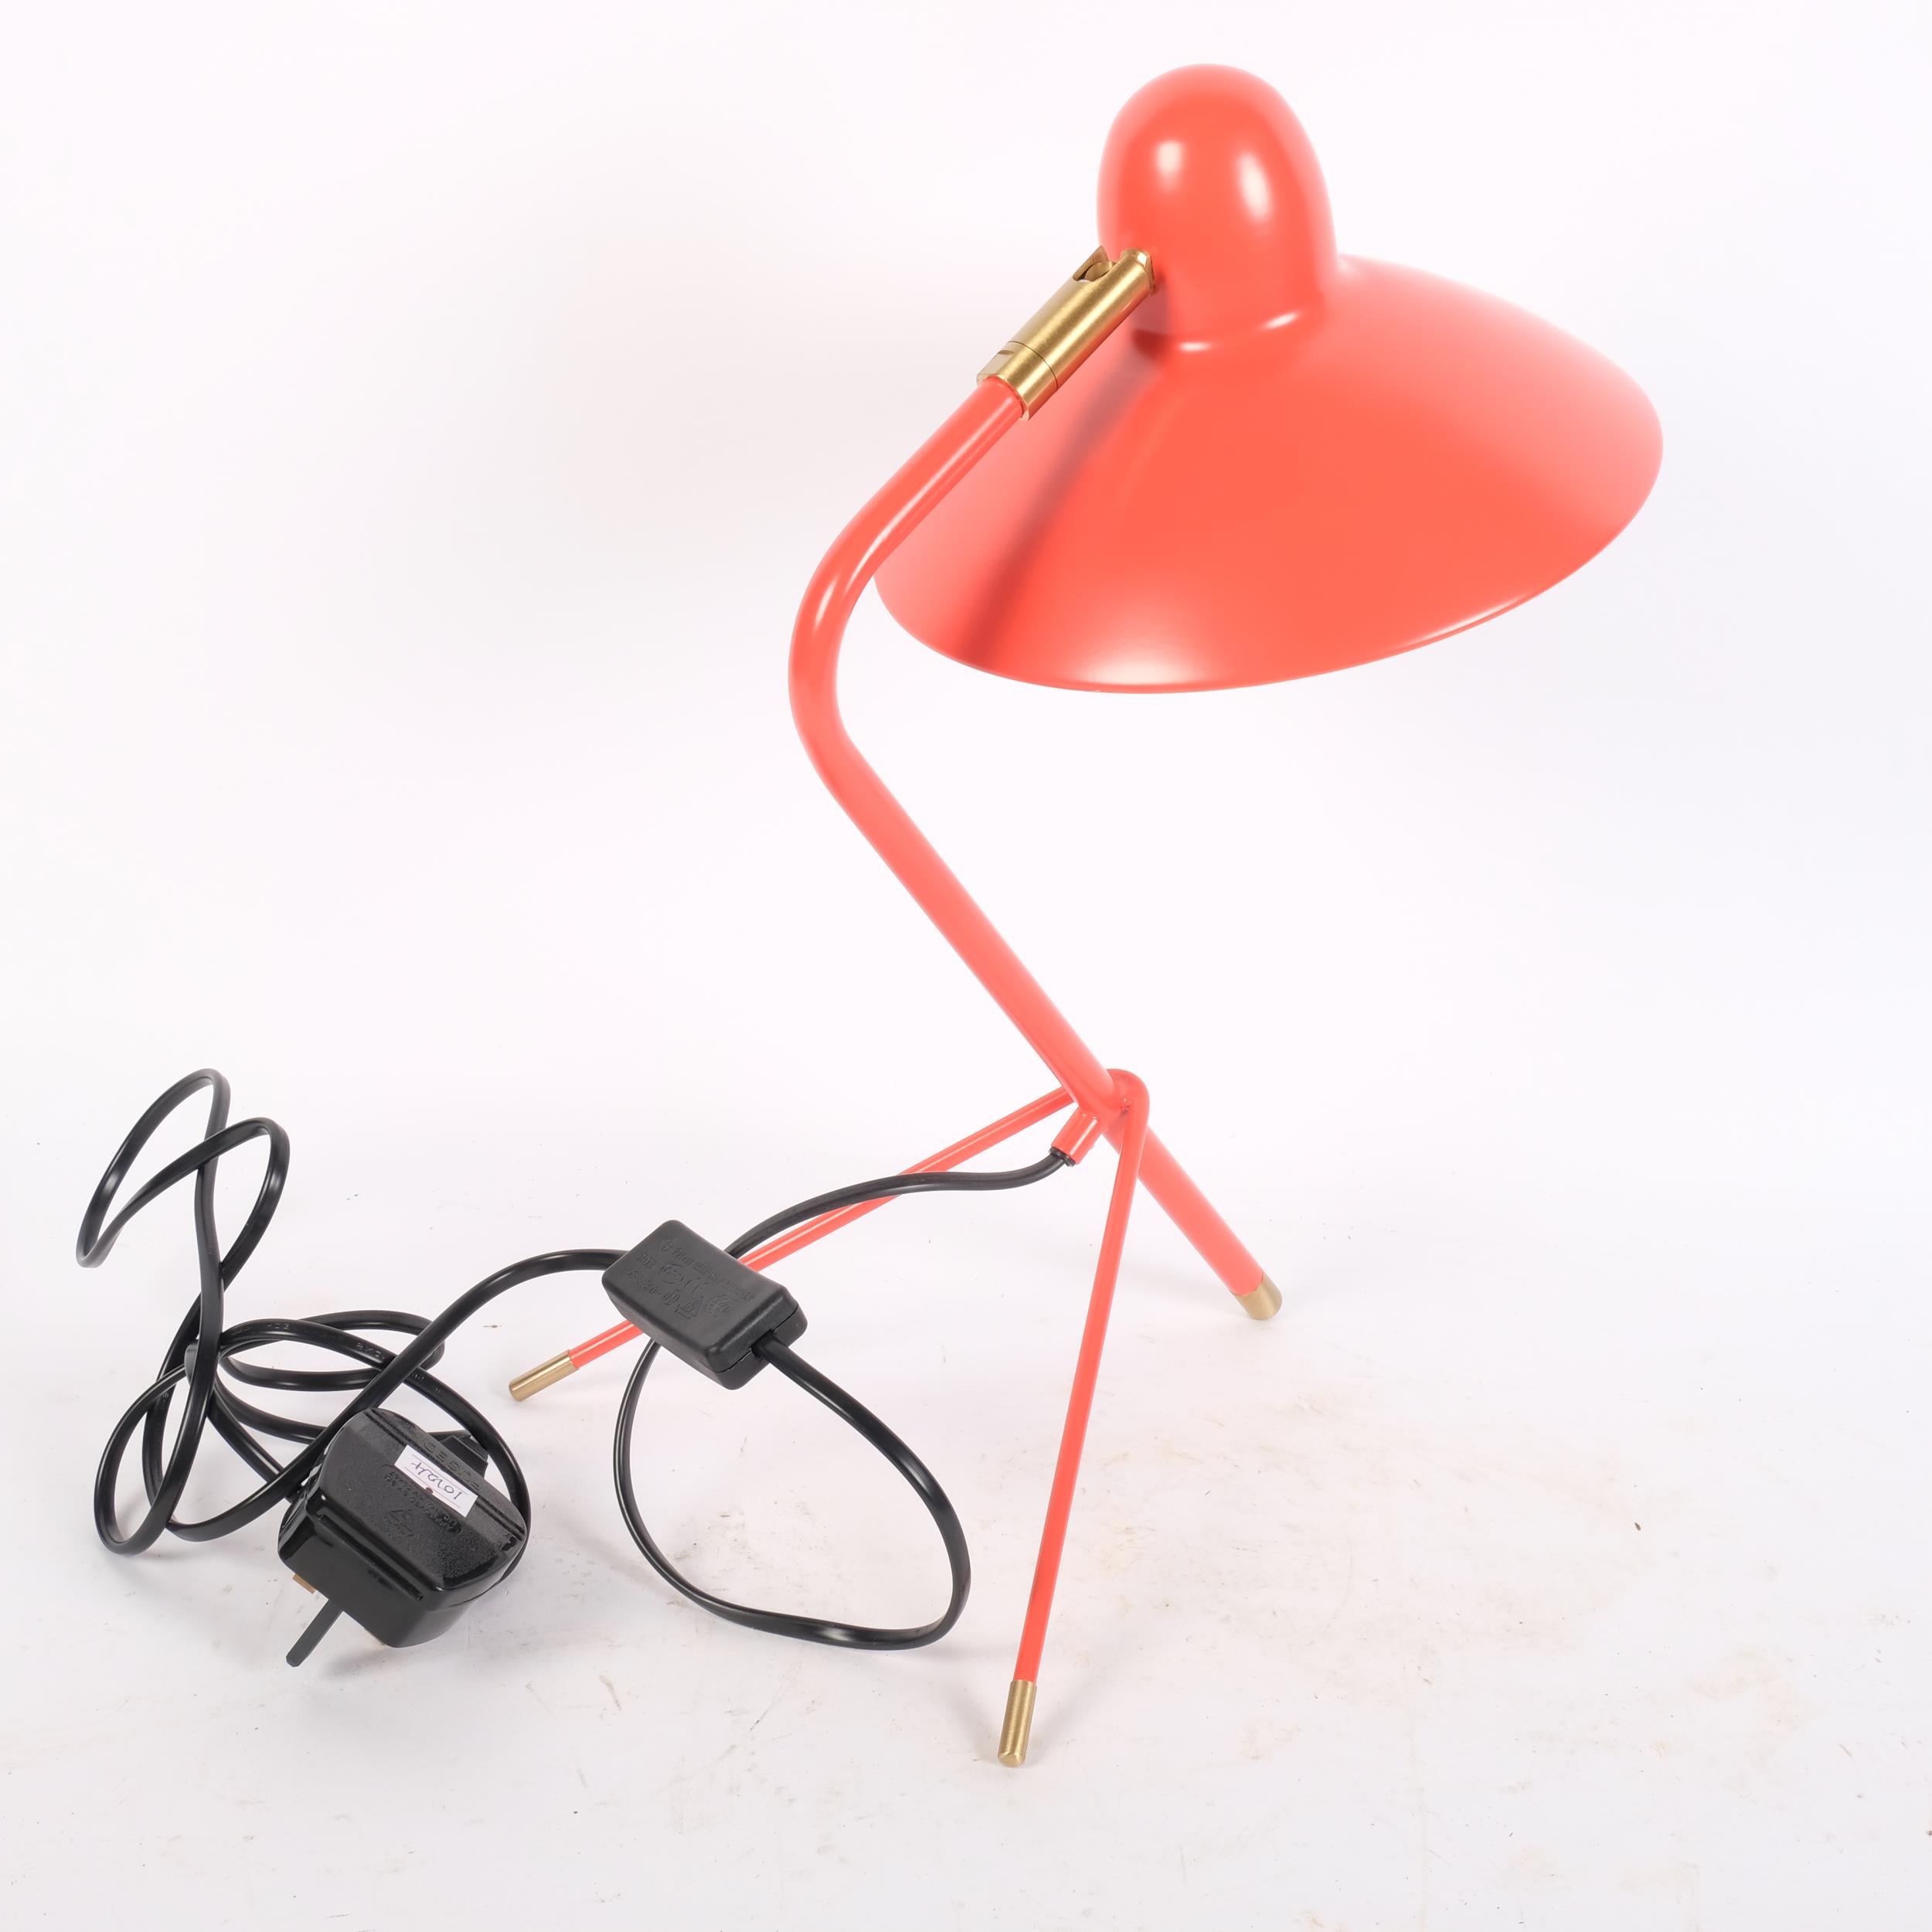 Di Classe, an Arles mid-century style desk lamp, by Domei Endo, with adjustable shade, H35cm - Image 2 of 2